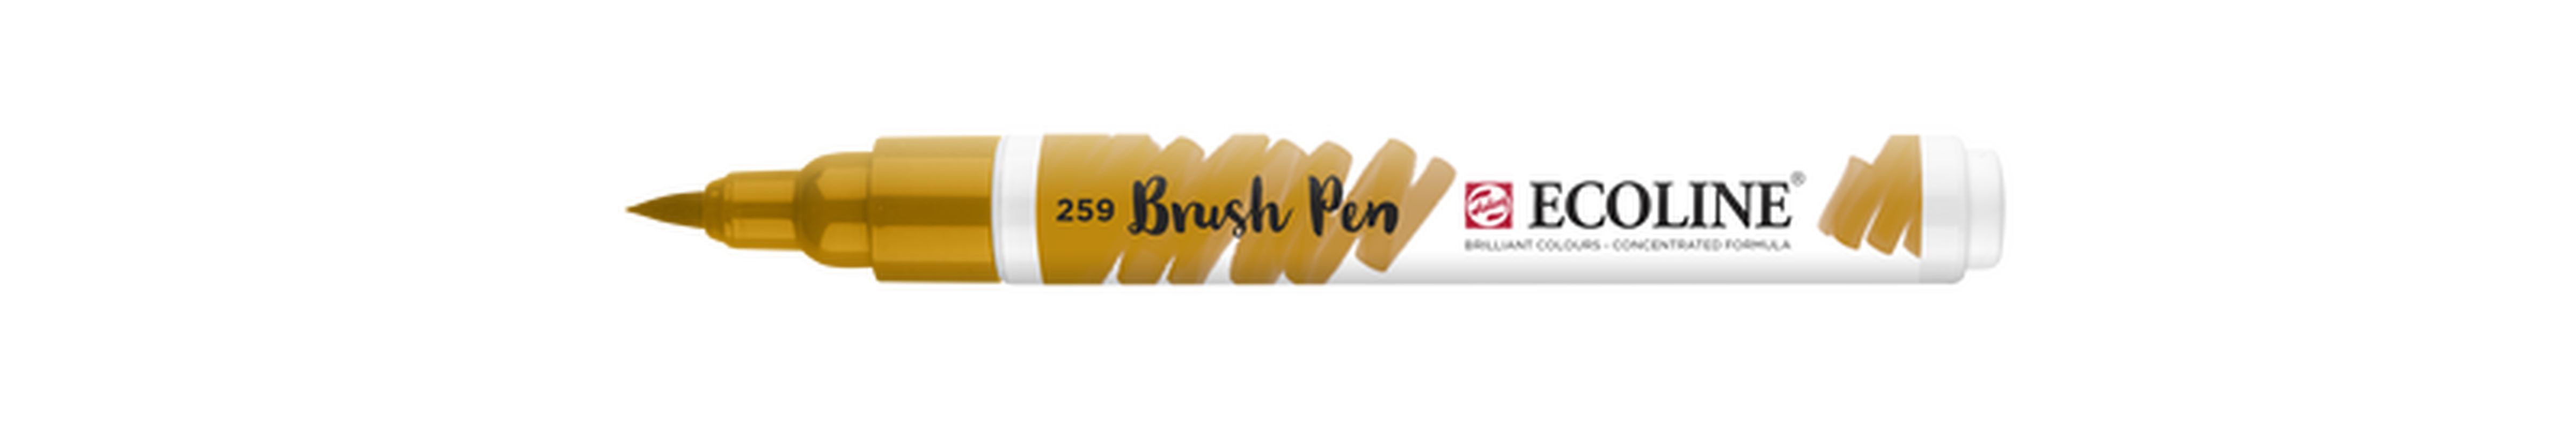 Talens Brush Pen Ecoline Number 259 Color Sand Yellow